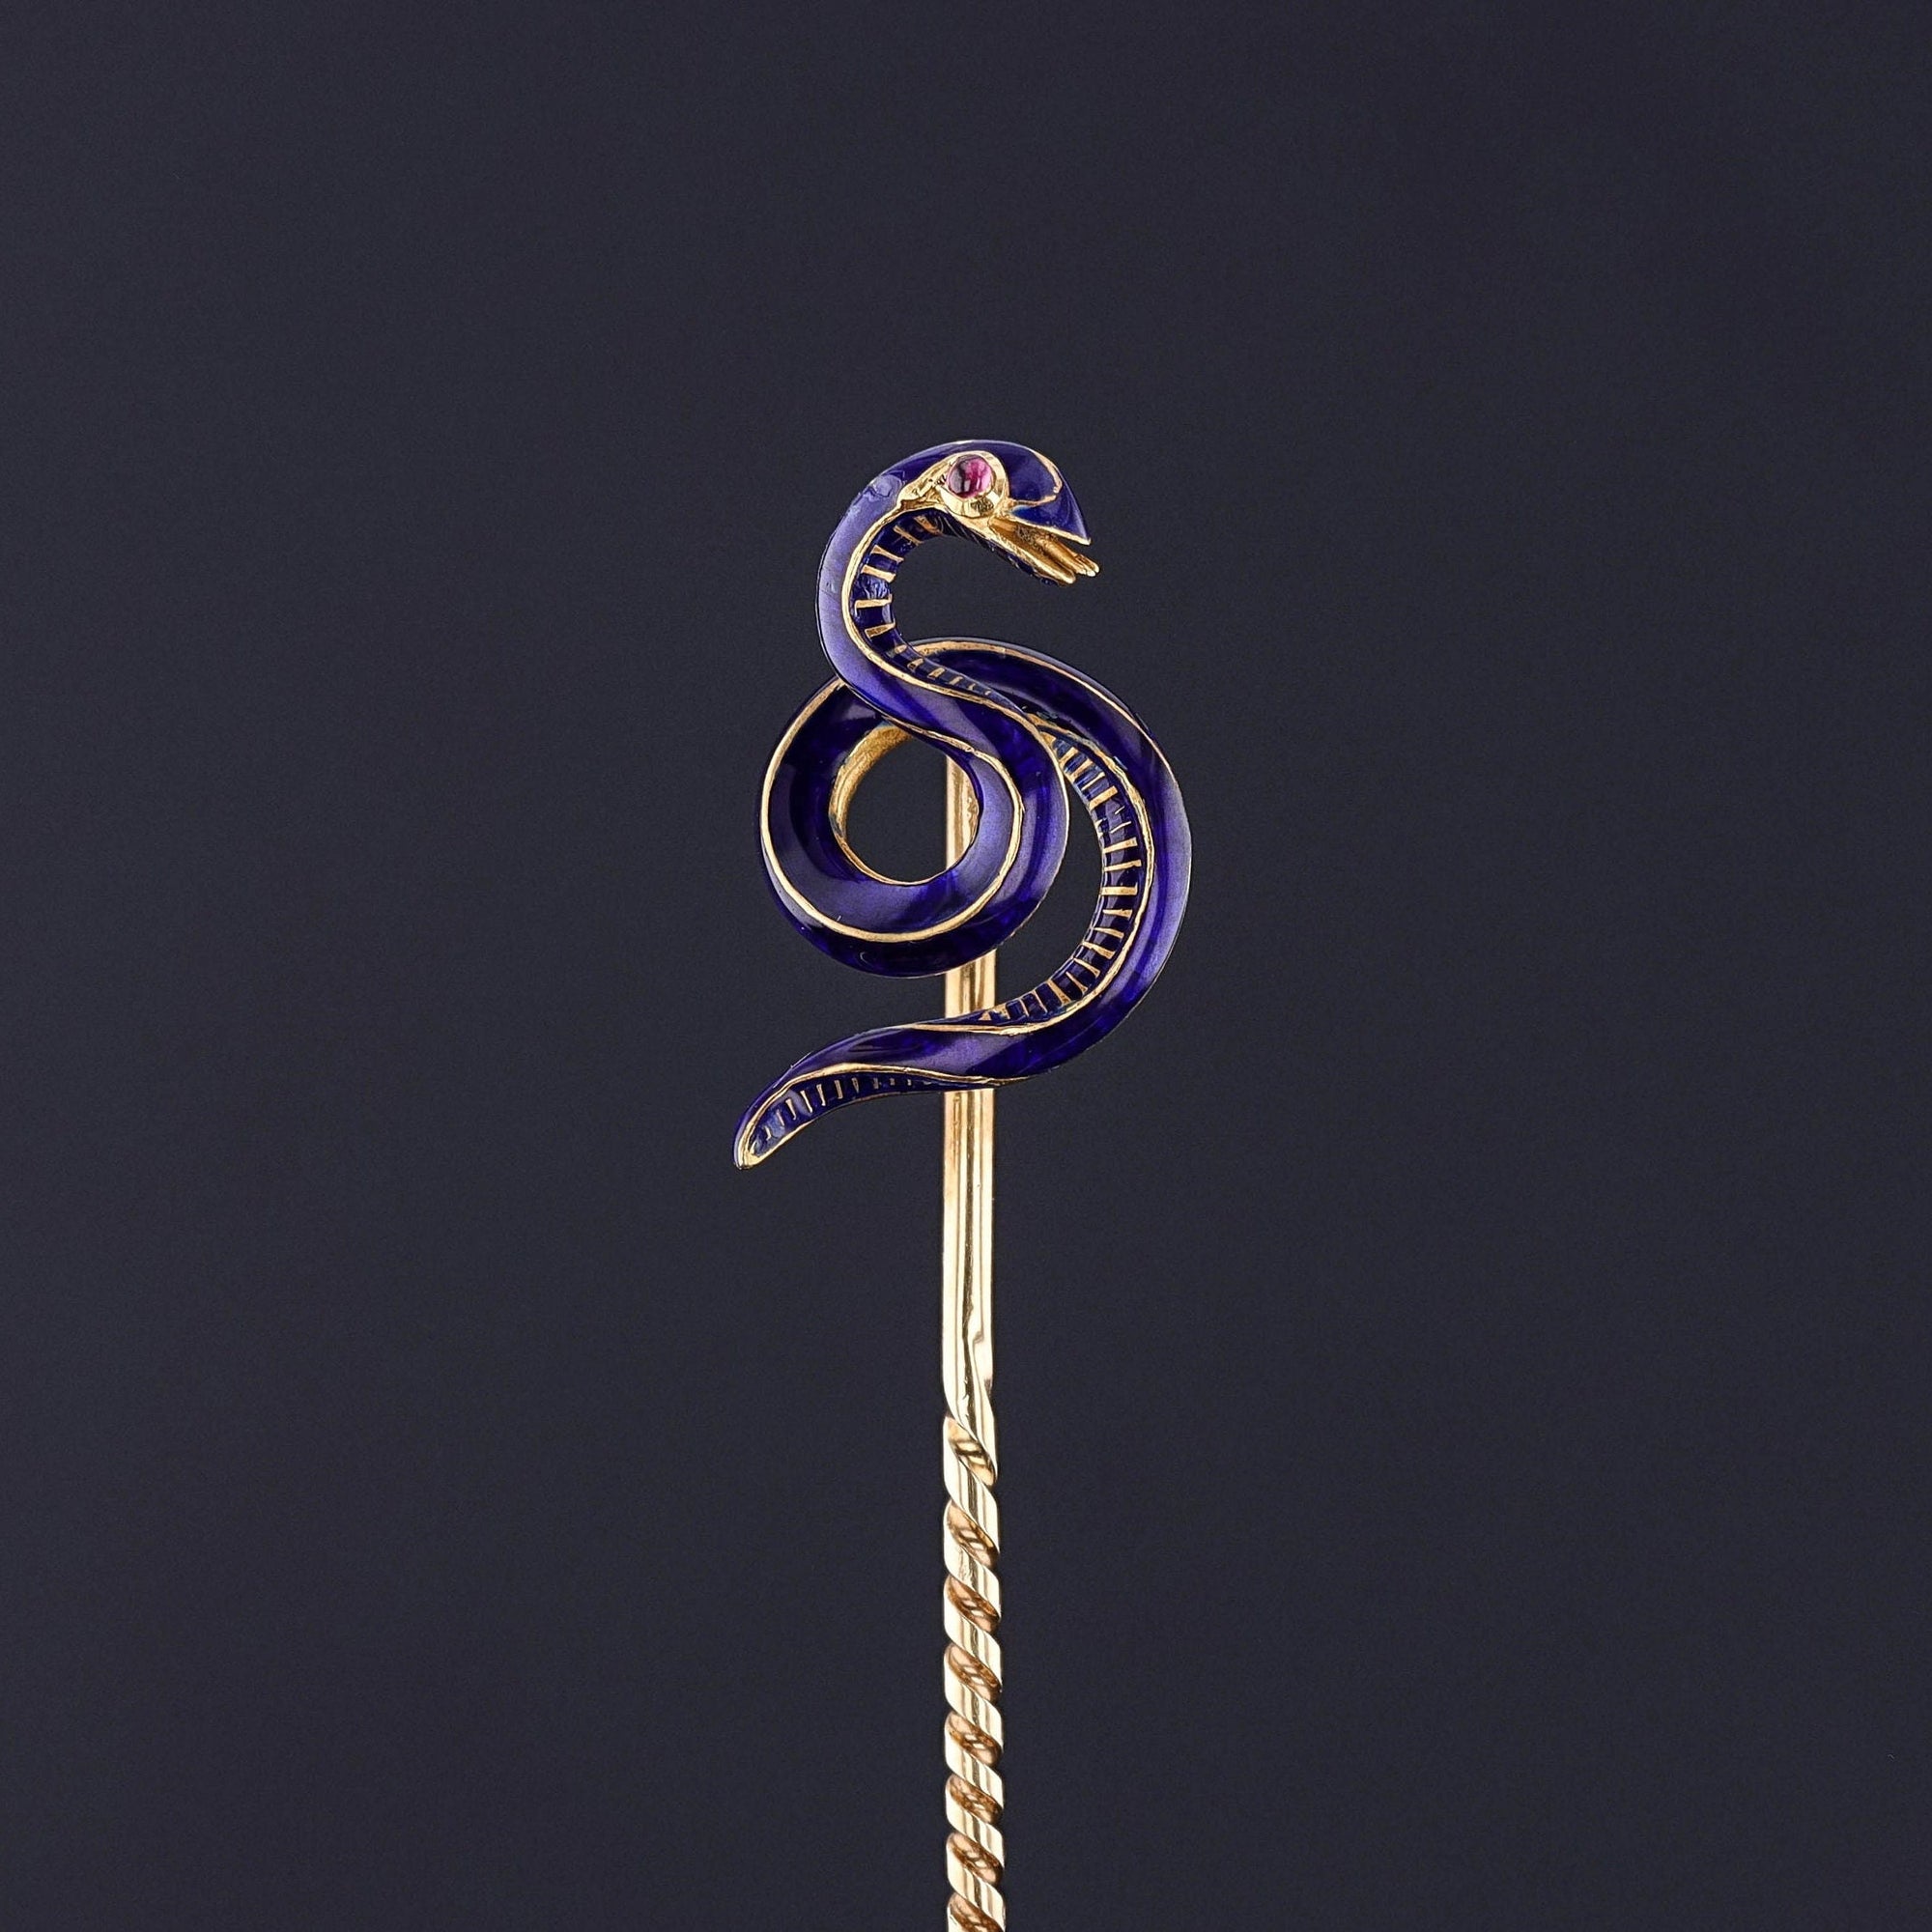 An antique enamel snake stickpin from the late Victorian era (circa 1870). The pin is in very good condition with a small bit of restoration on the reverse of the piece. A perfect gift for any man or woman. Unisex jewelry at its finest.